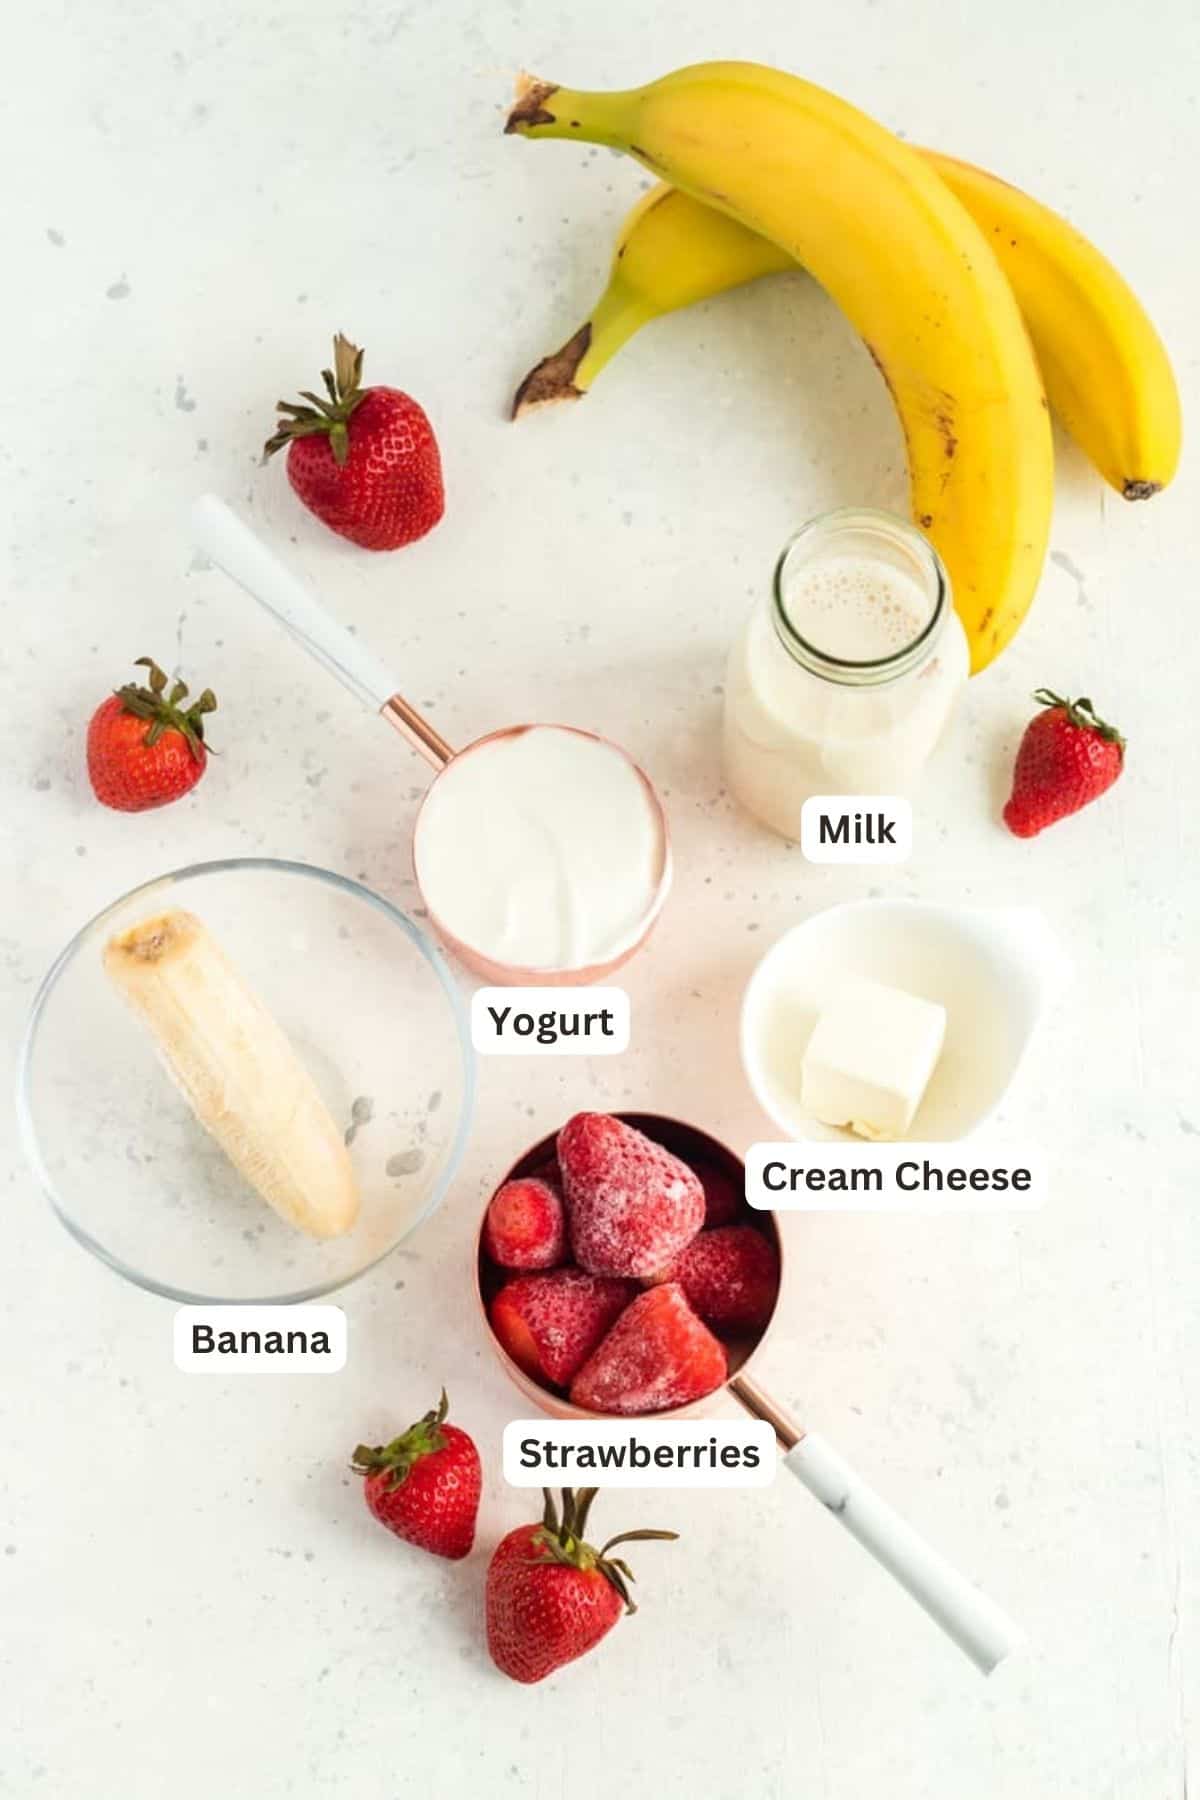 Ingredients for Sweet & Creamy Strawberry Smoothie – Tastes Like Cheesecake.